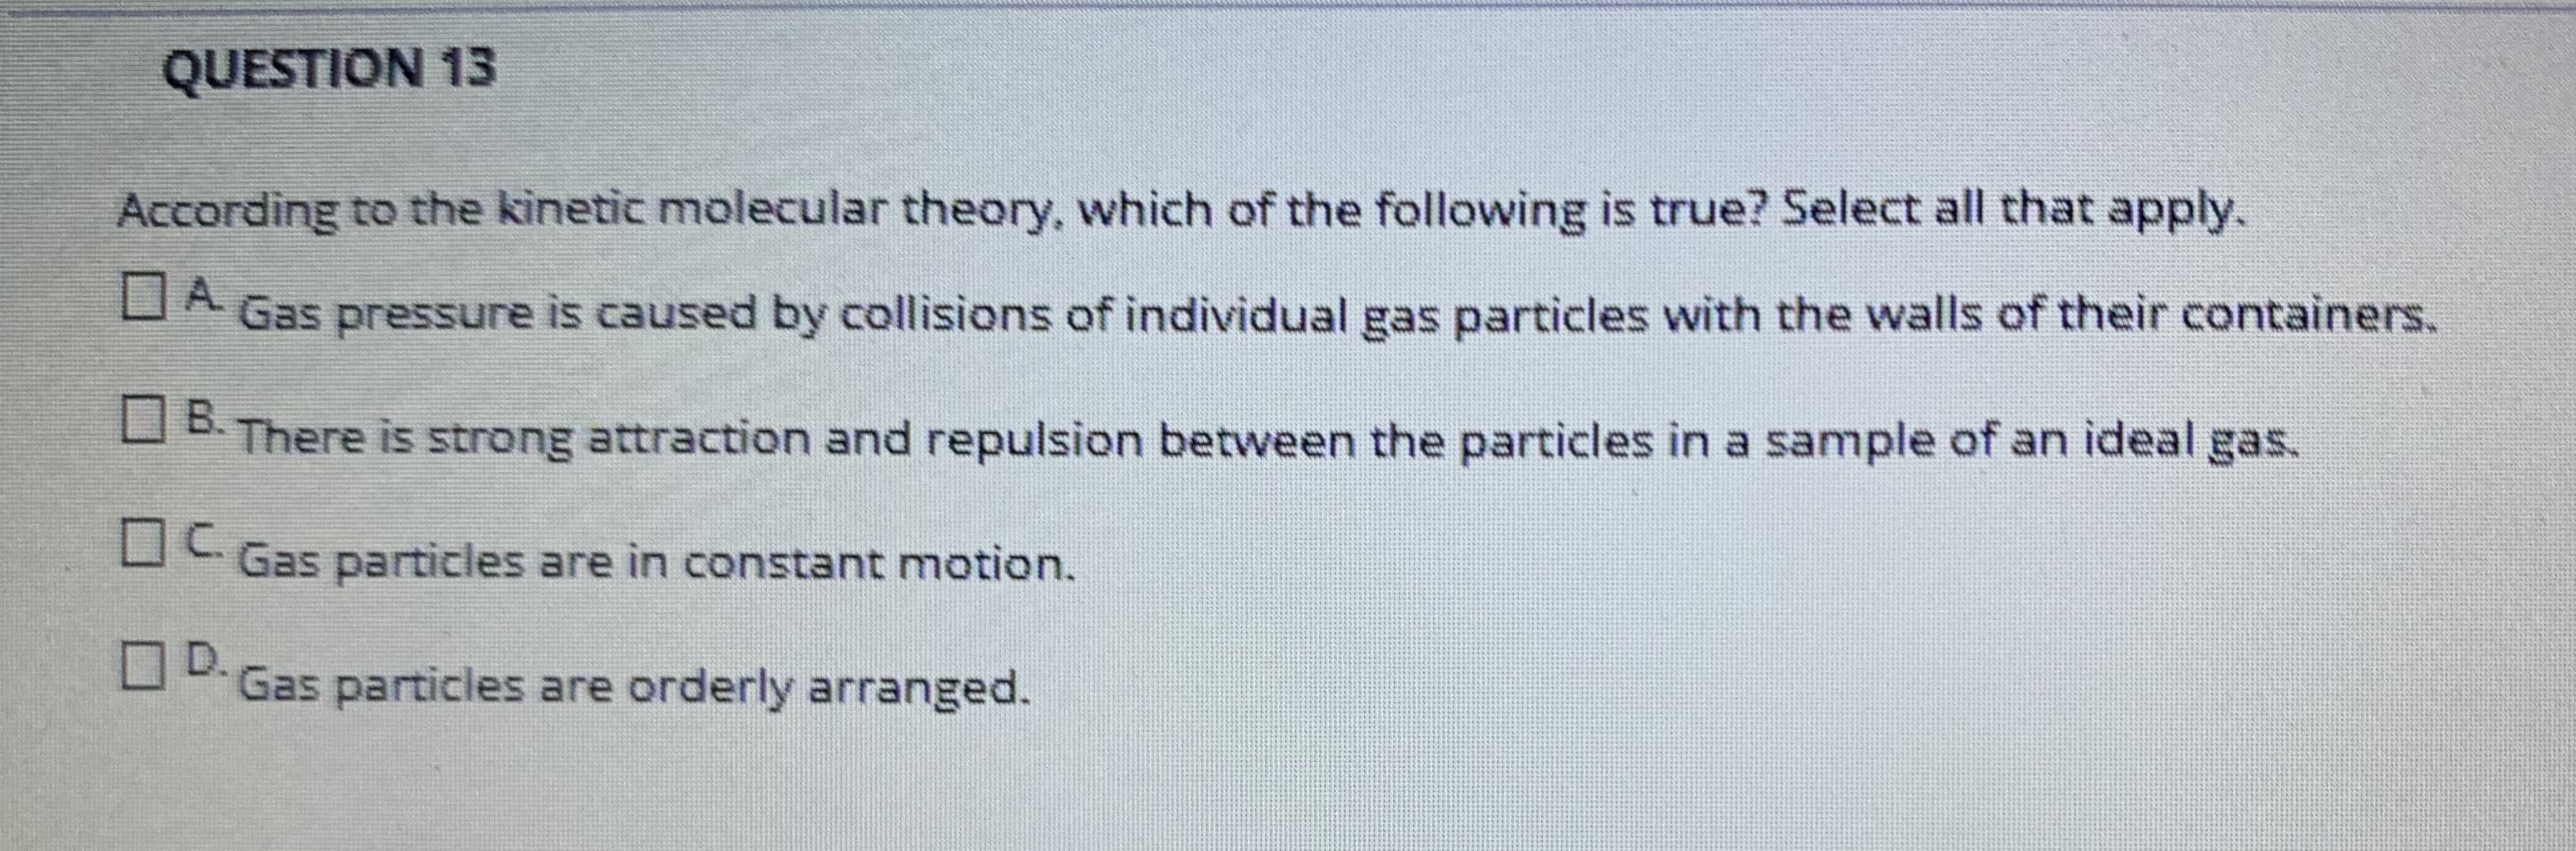 According to the kinetic molecular theory, which of the following is true? Select all that apply.
DA Gas pressure is caused by collisions of individual gas particles with the walls of their containers.
A.
B.
OB There is strong attraction and repulsion between the particles in a sample of an ideal gas.
Gas particles are in constant motion.
D.
O Gas particles are orderly arranged.
